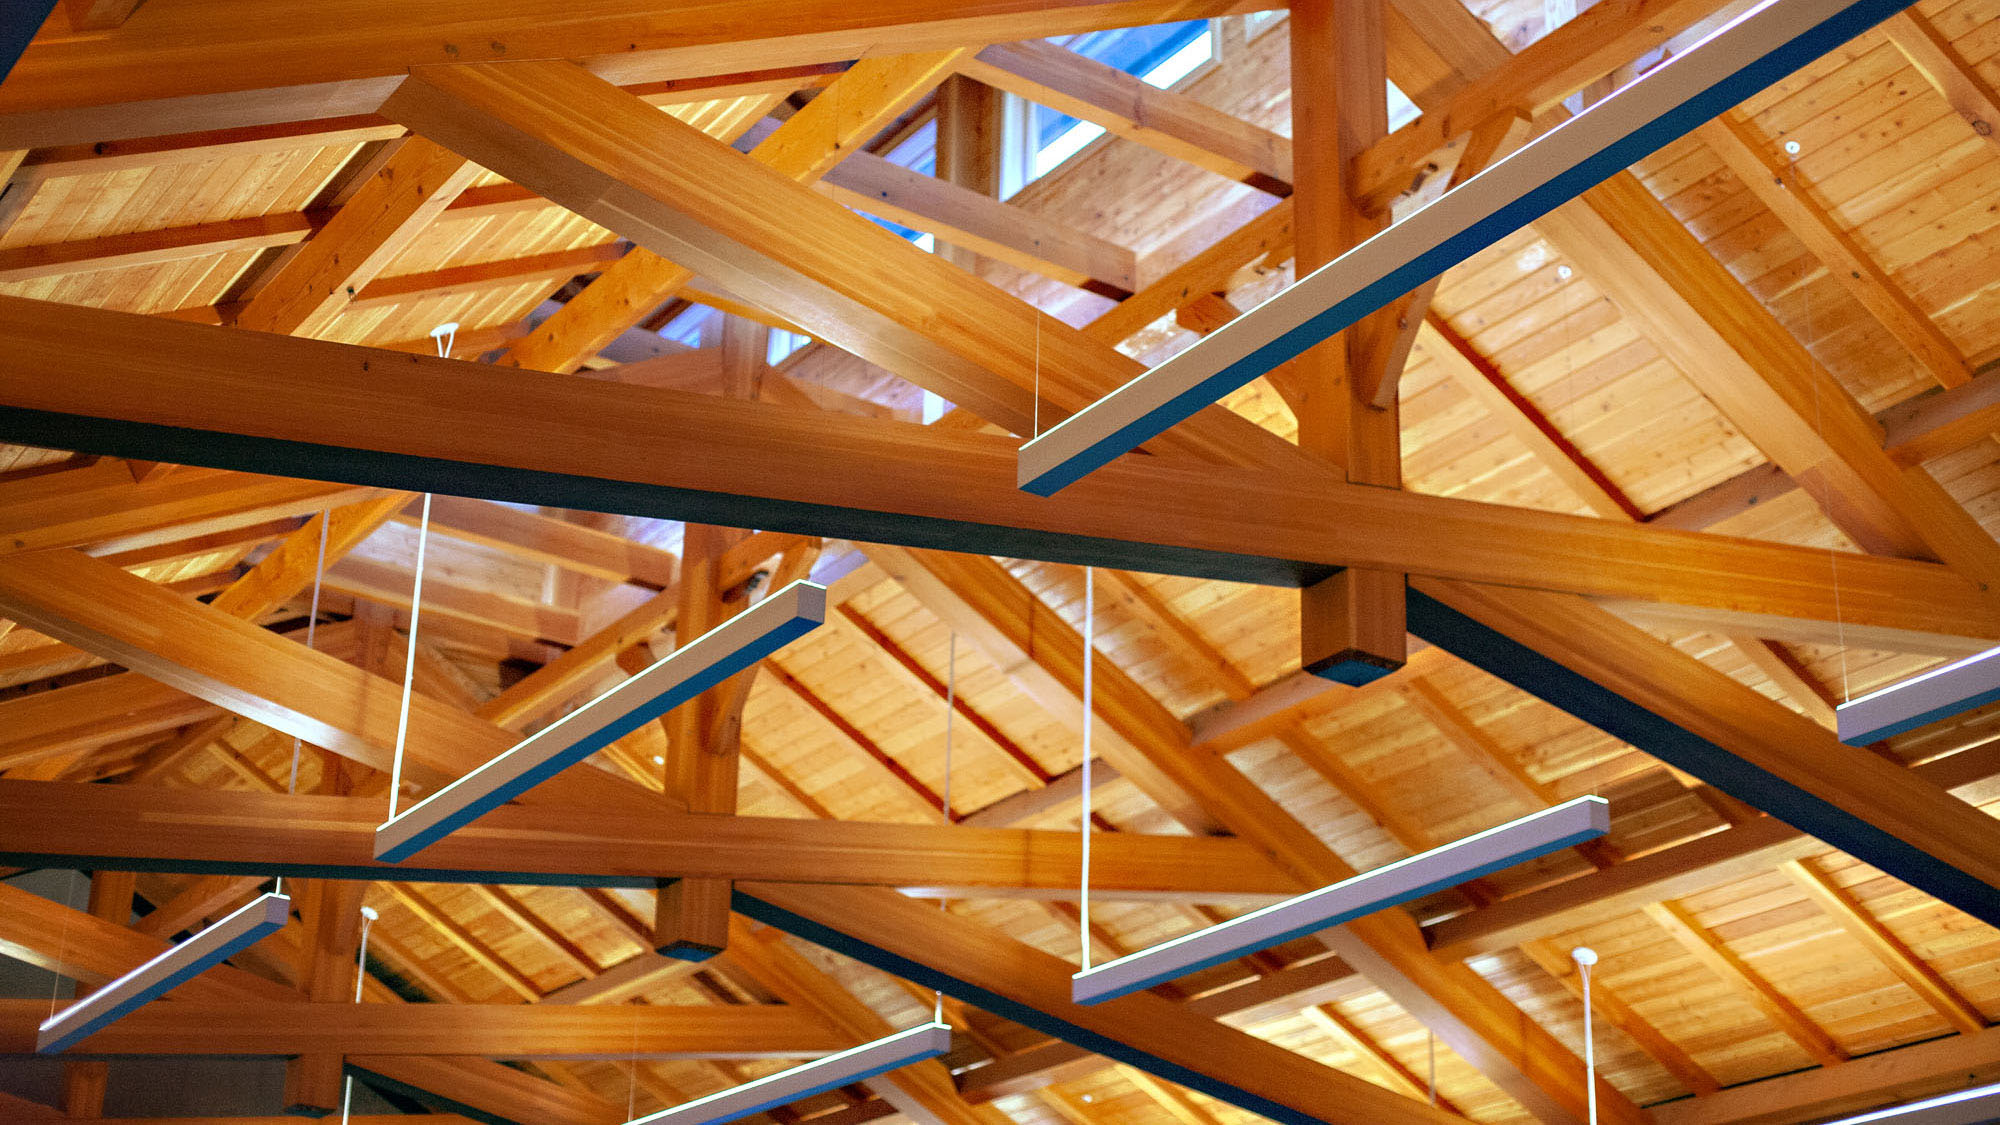 Wooden truss inside the barn, geometrically patterned with light fixtures evenly spaced.